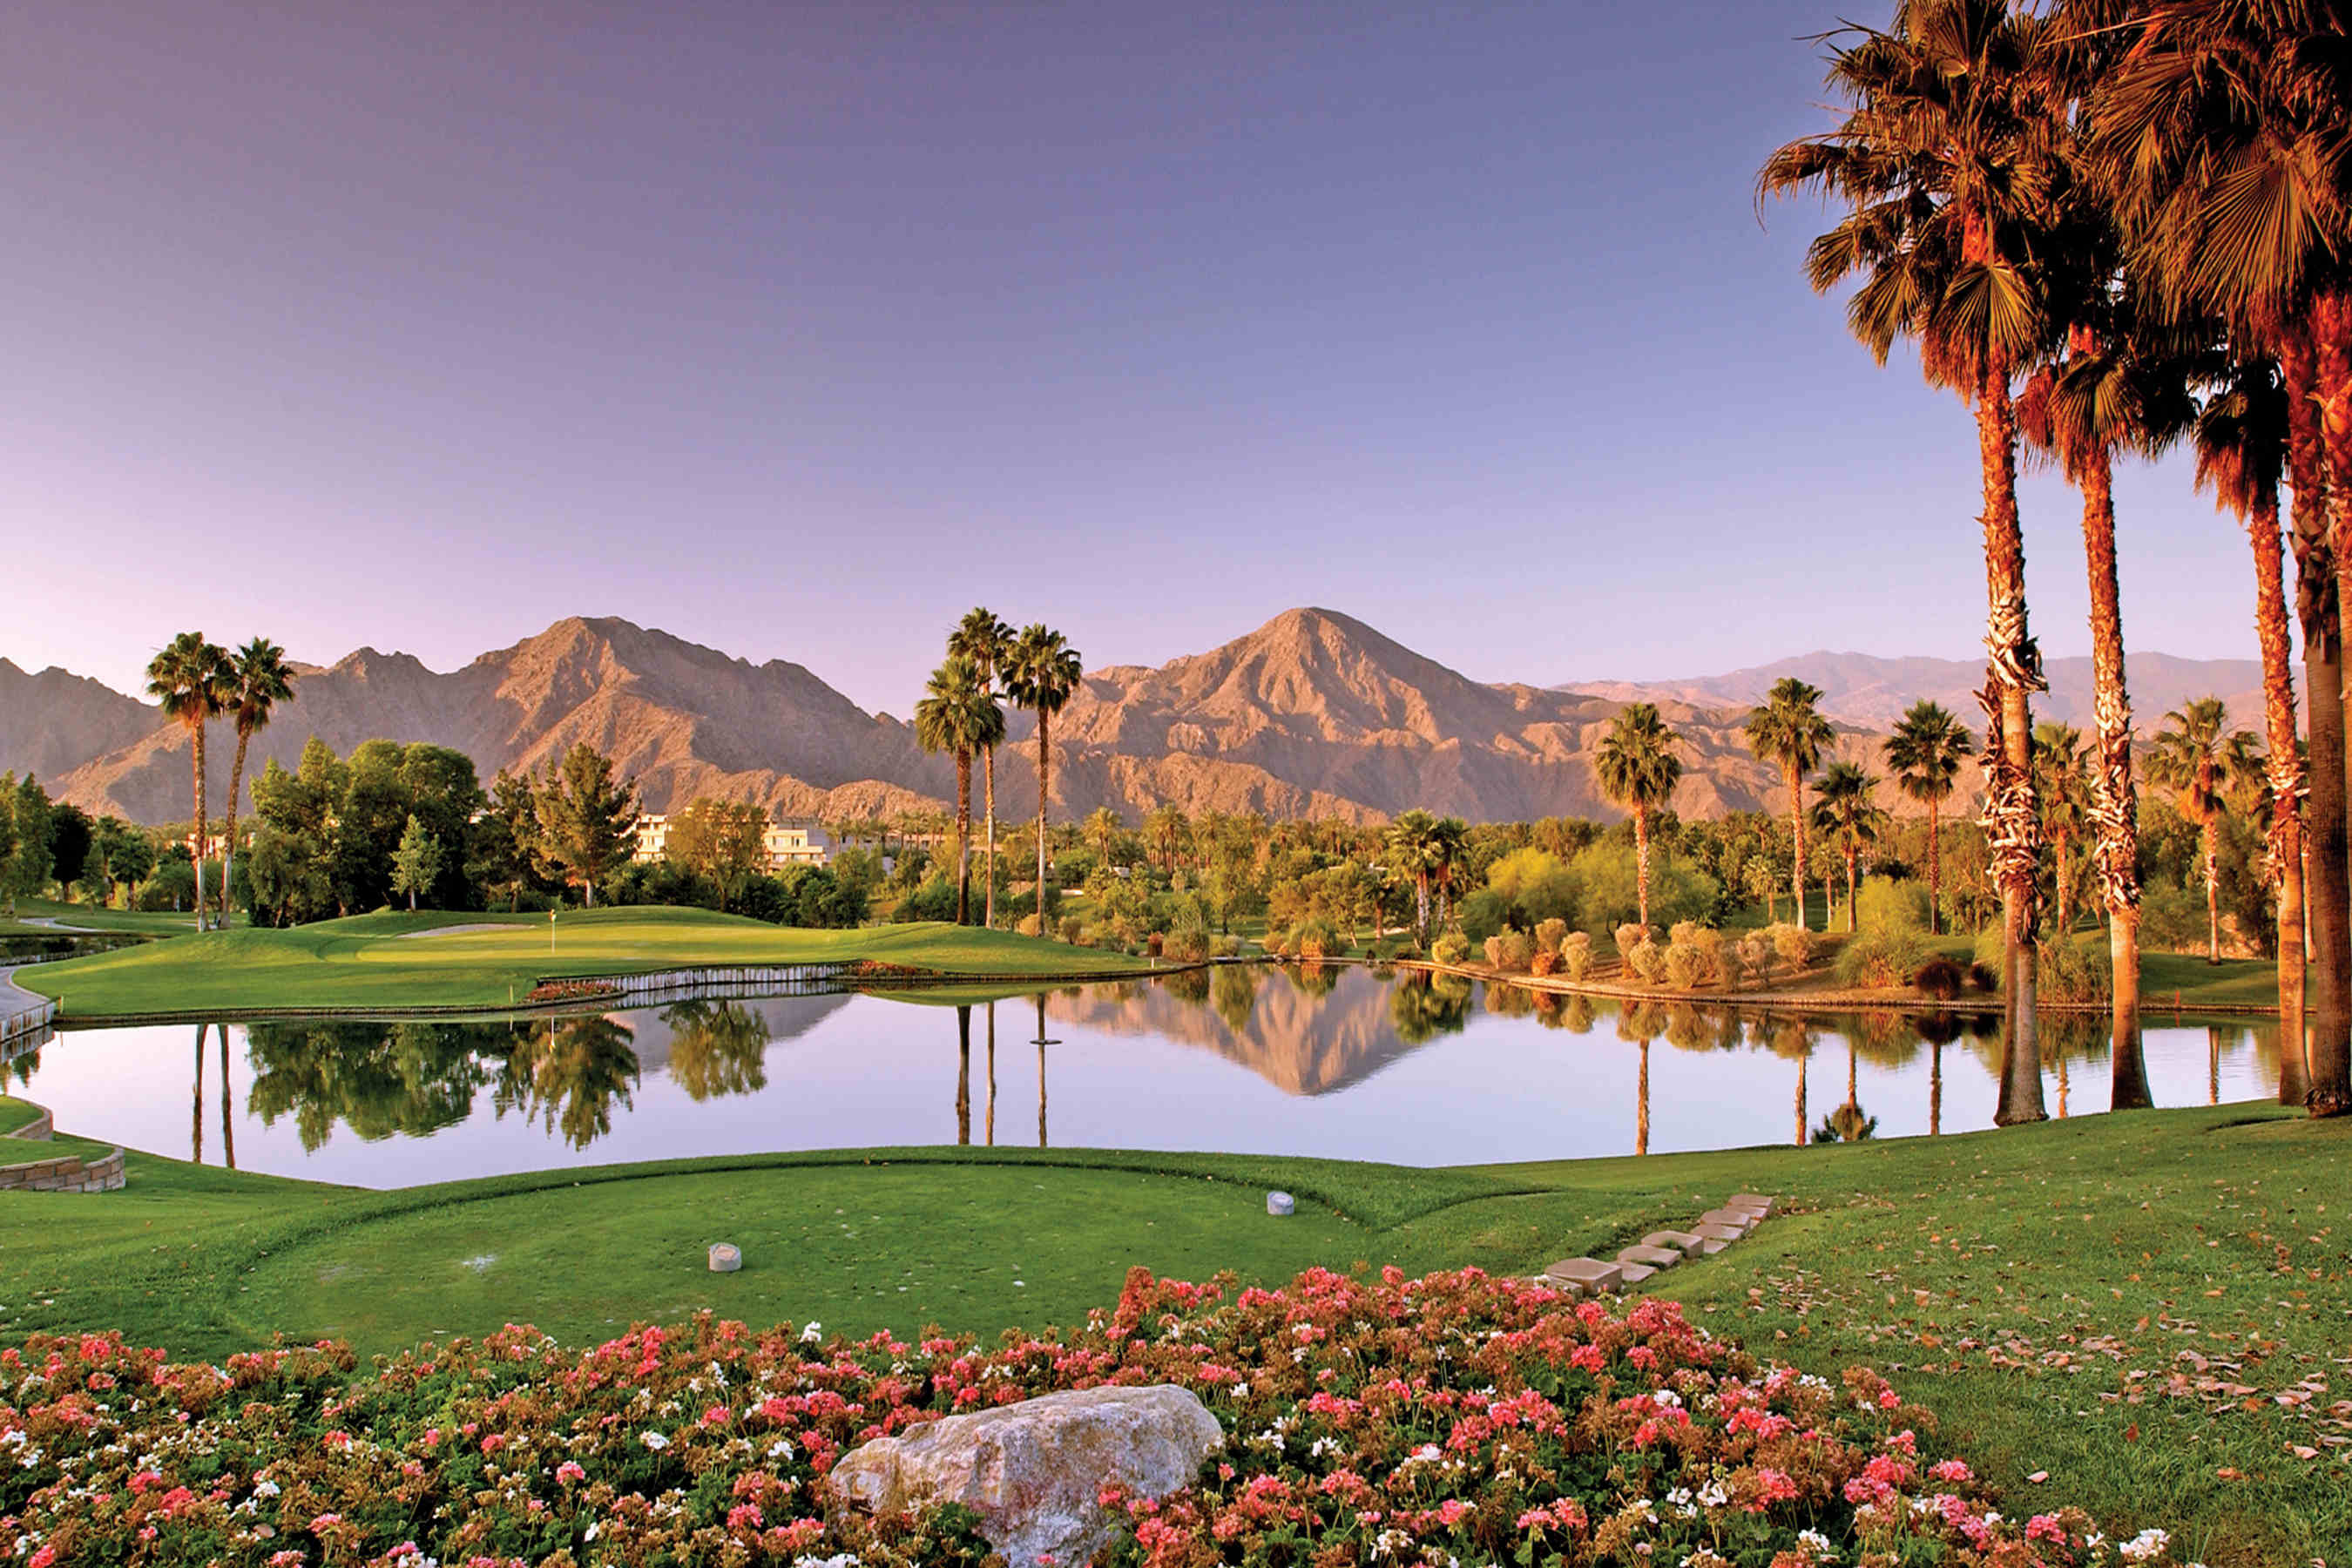 See why sunny Palm Springs is one of the nation’s most sustainable